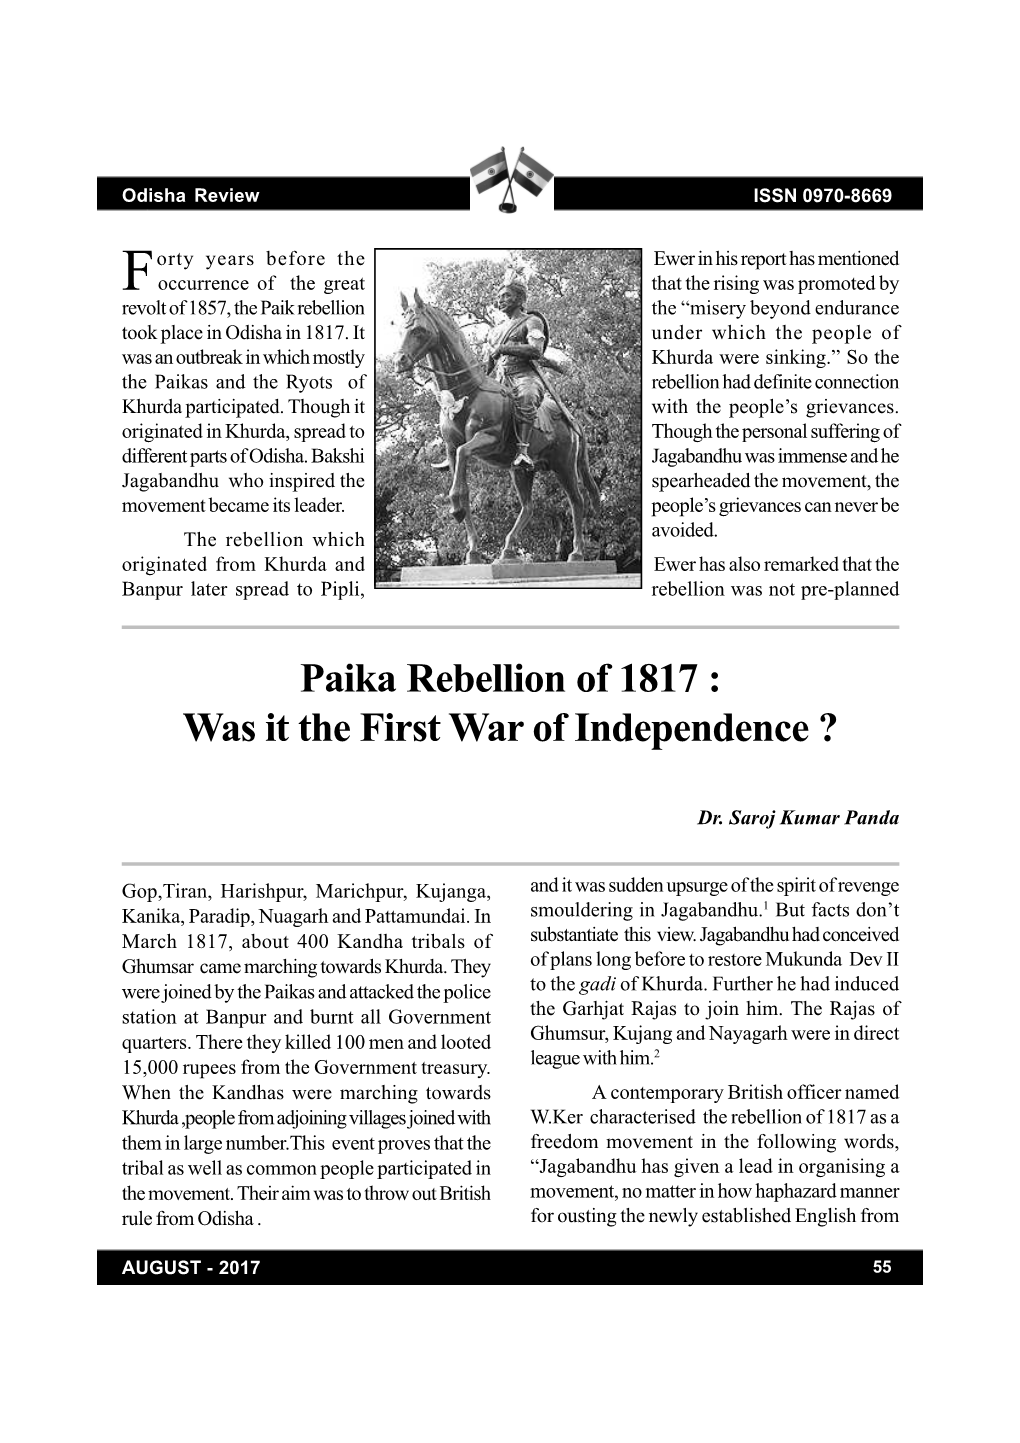 Paika Rebellion of 1817 : Was It the First War of Independence ?